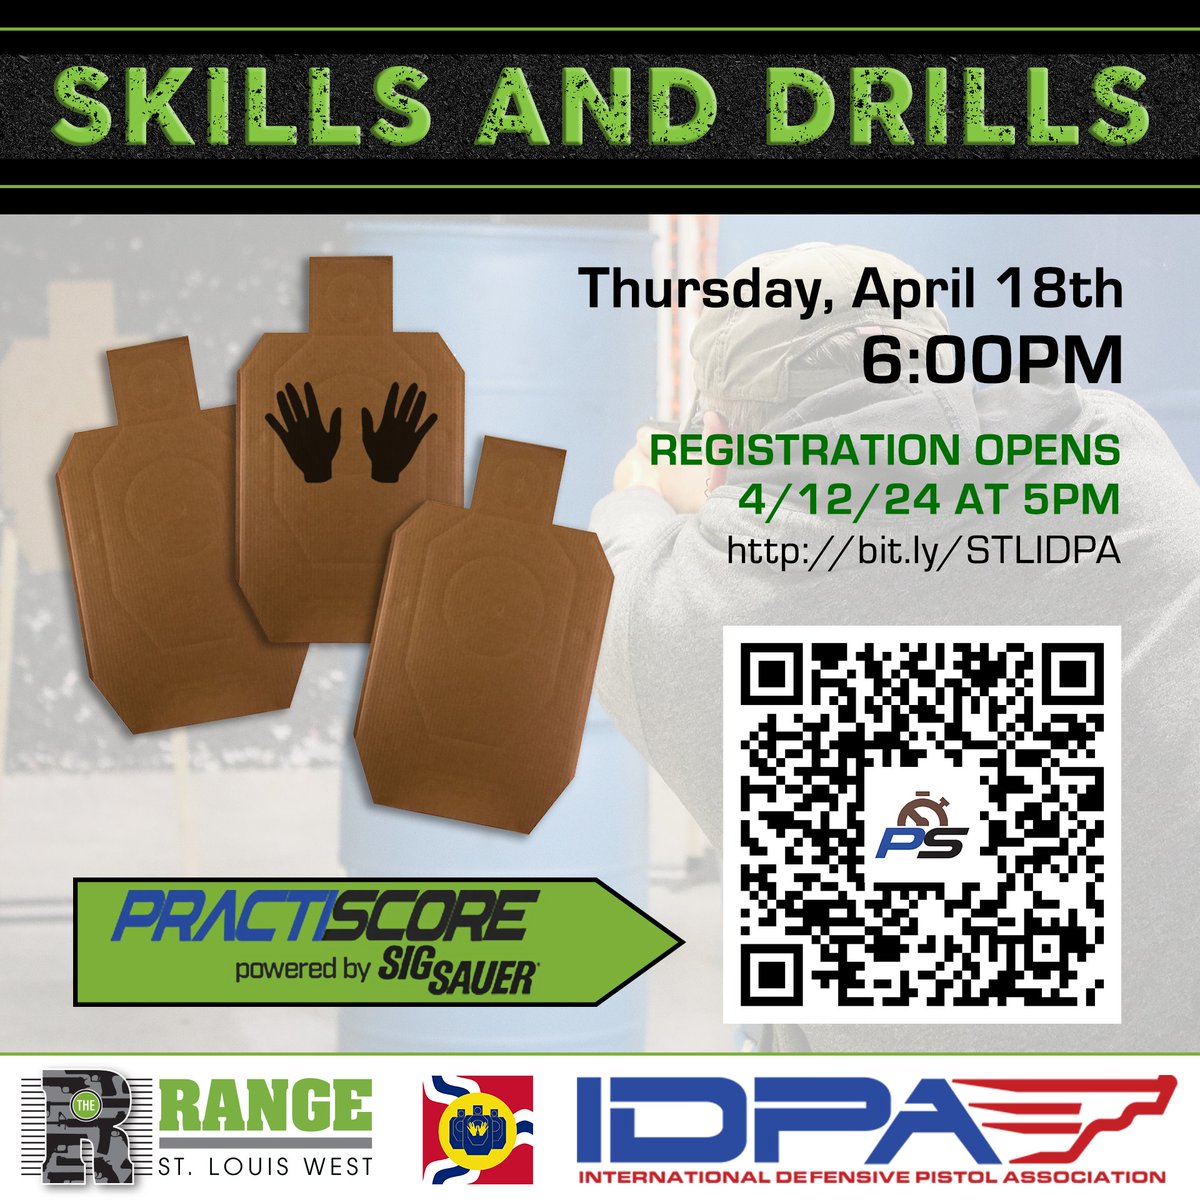 Sign-ups for next week's @shootidpa Competition Skills and Drills open at 5PM today!

Sign up at bit.ly/STLIDPA

The waiver is located at smartwaiver.com/splash/37511

#idpa #gatewayidpa #competitionshooting #competitiveshooting #shootingsports #stl #stlouis #stlouismo